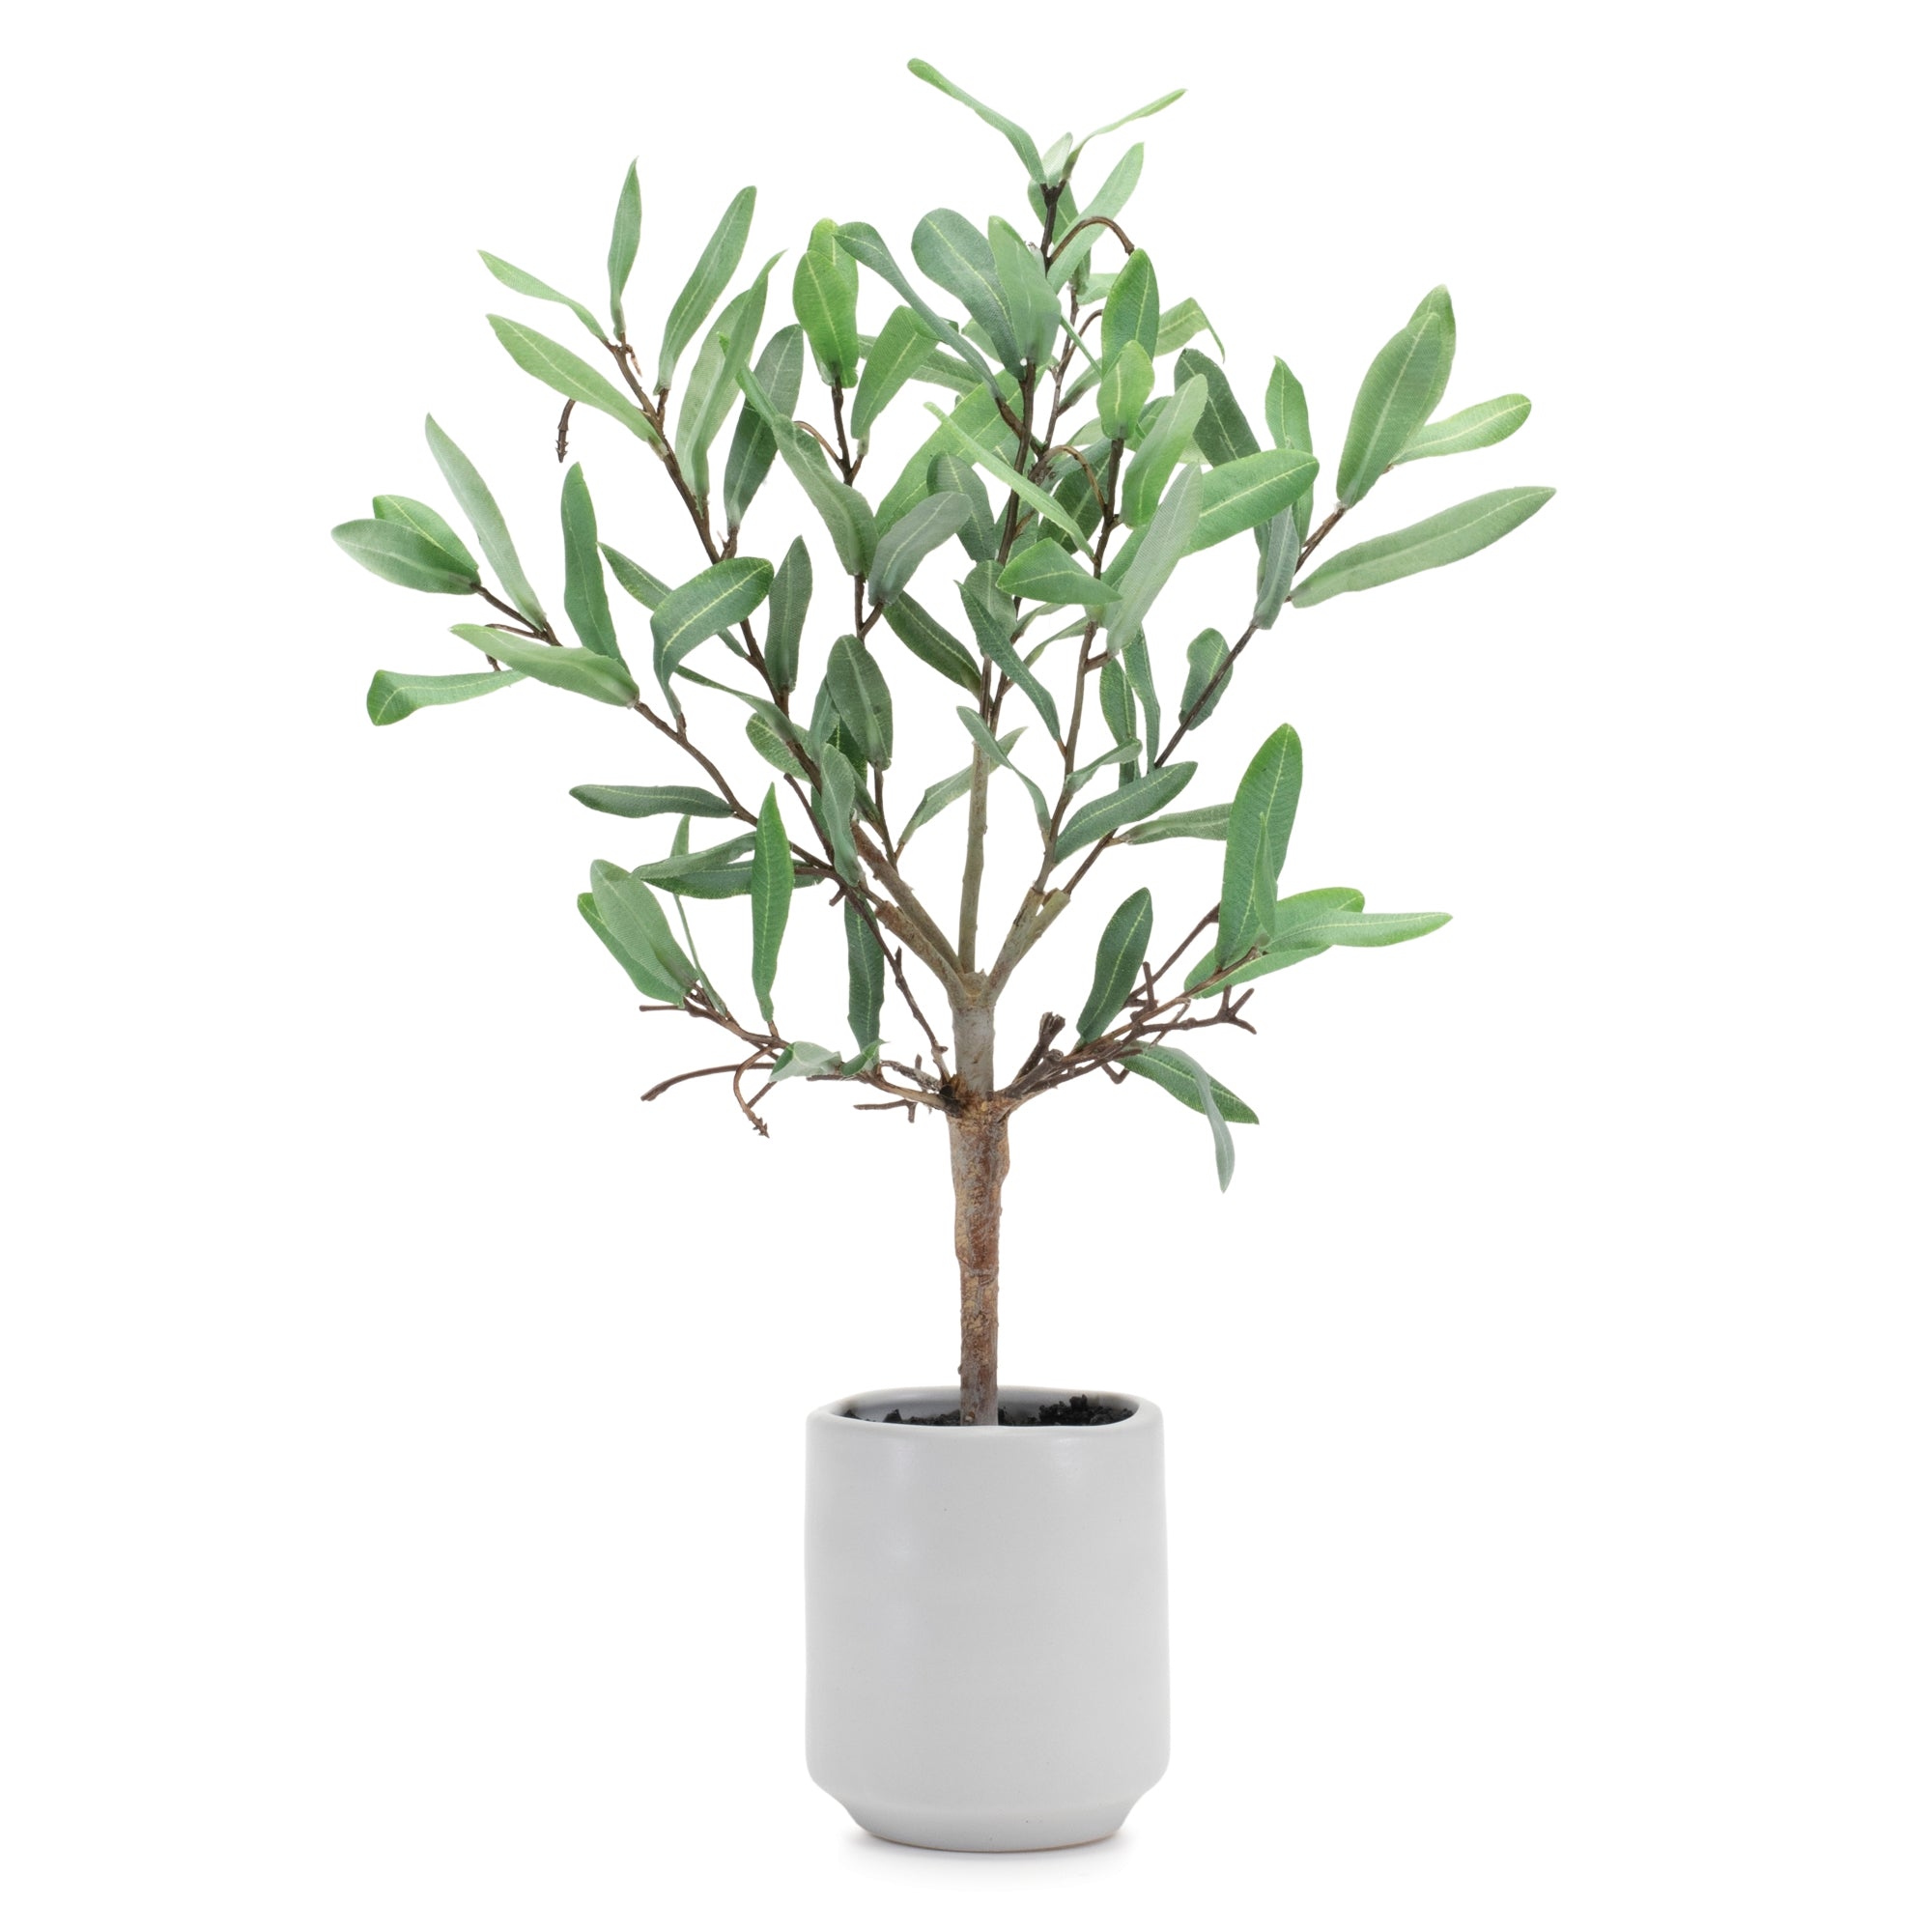 Potted Olive Leaf Topiary 17.5"H